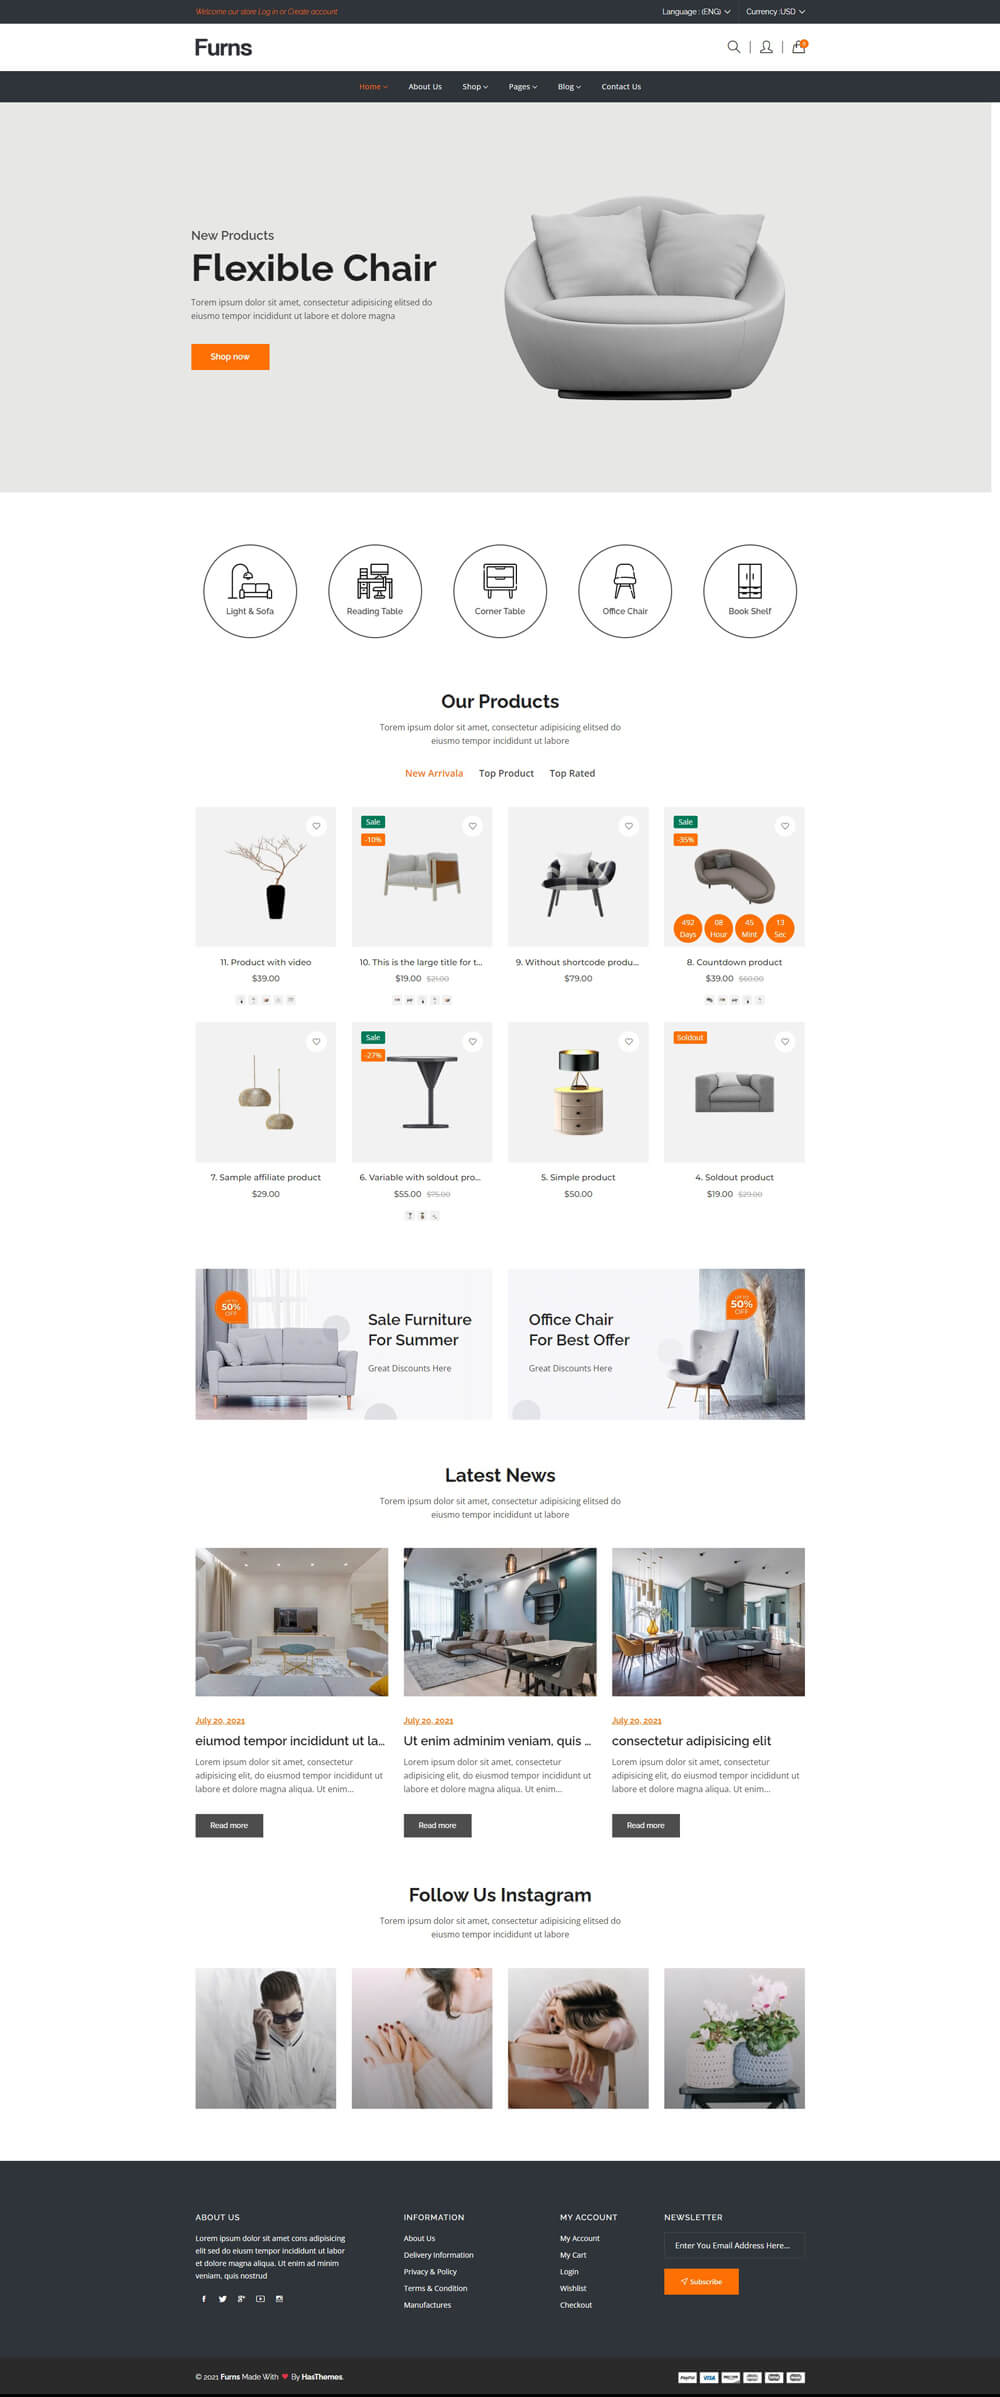 Furns- simple furniture Shopify theme